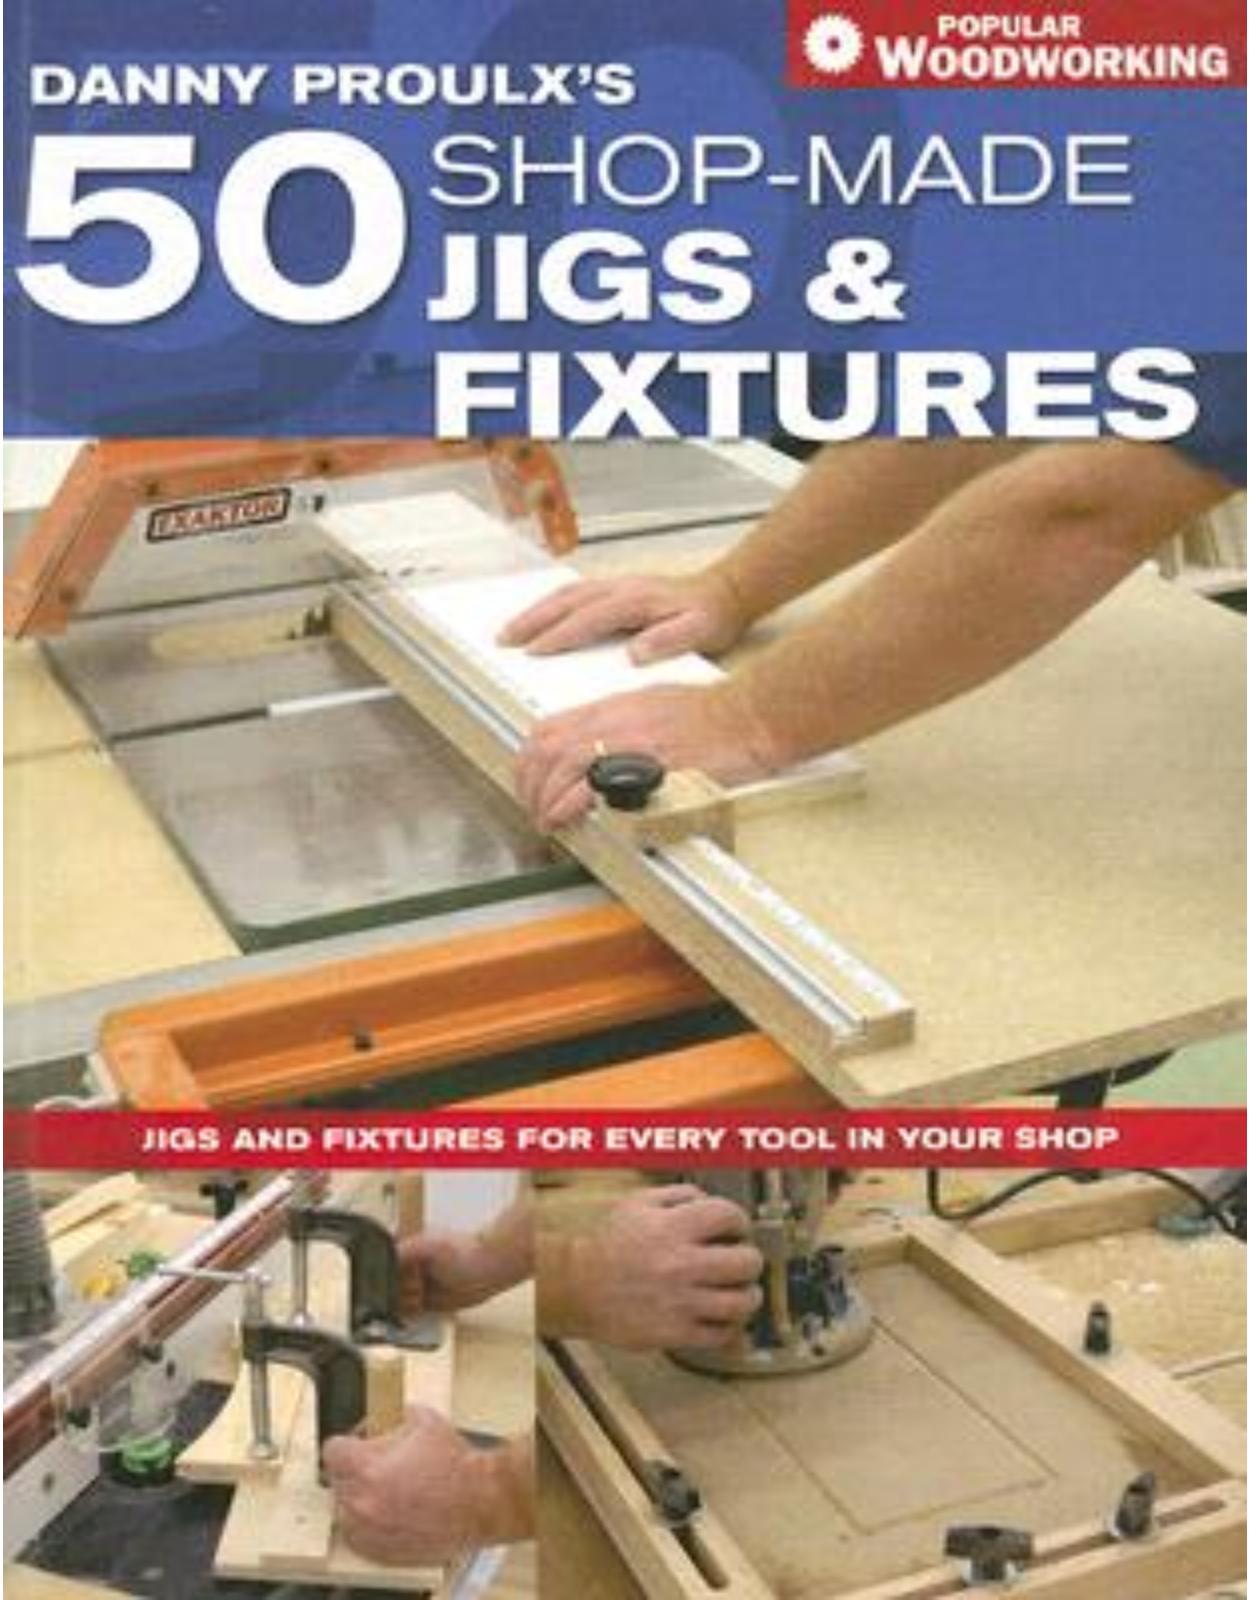 Danny Proulx's 50 Shop-Made Jigs and Fixtures